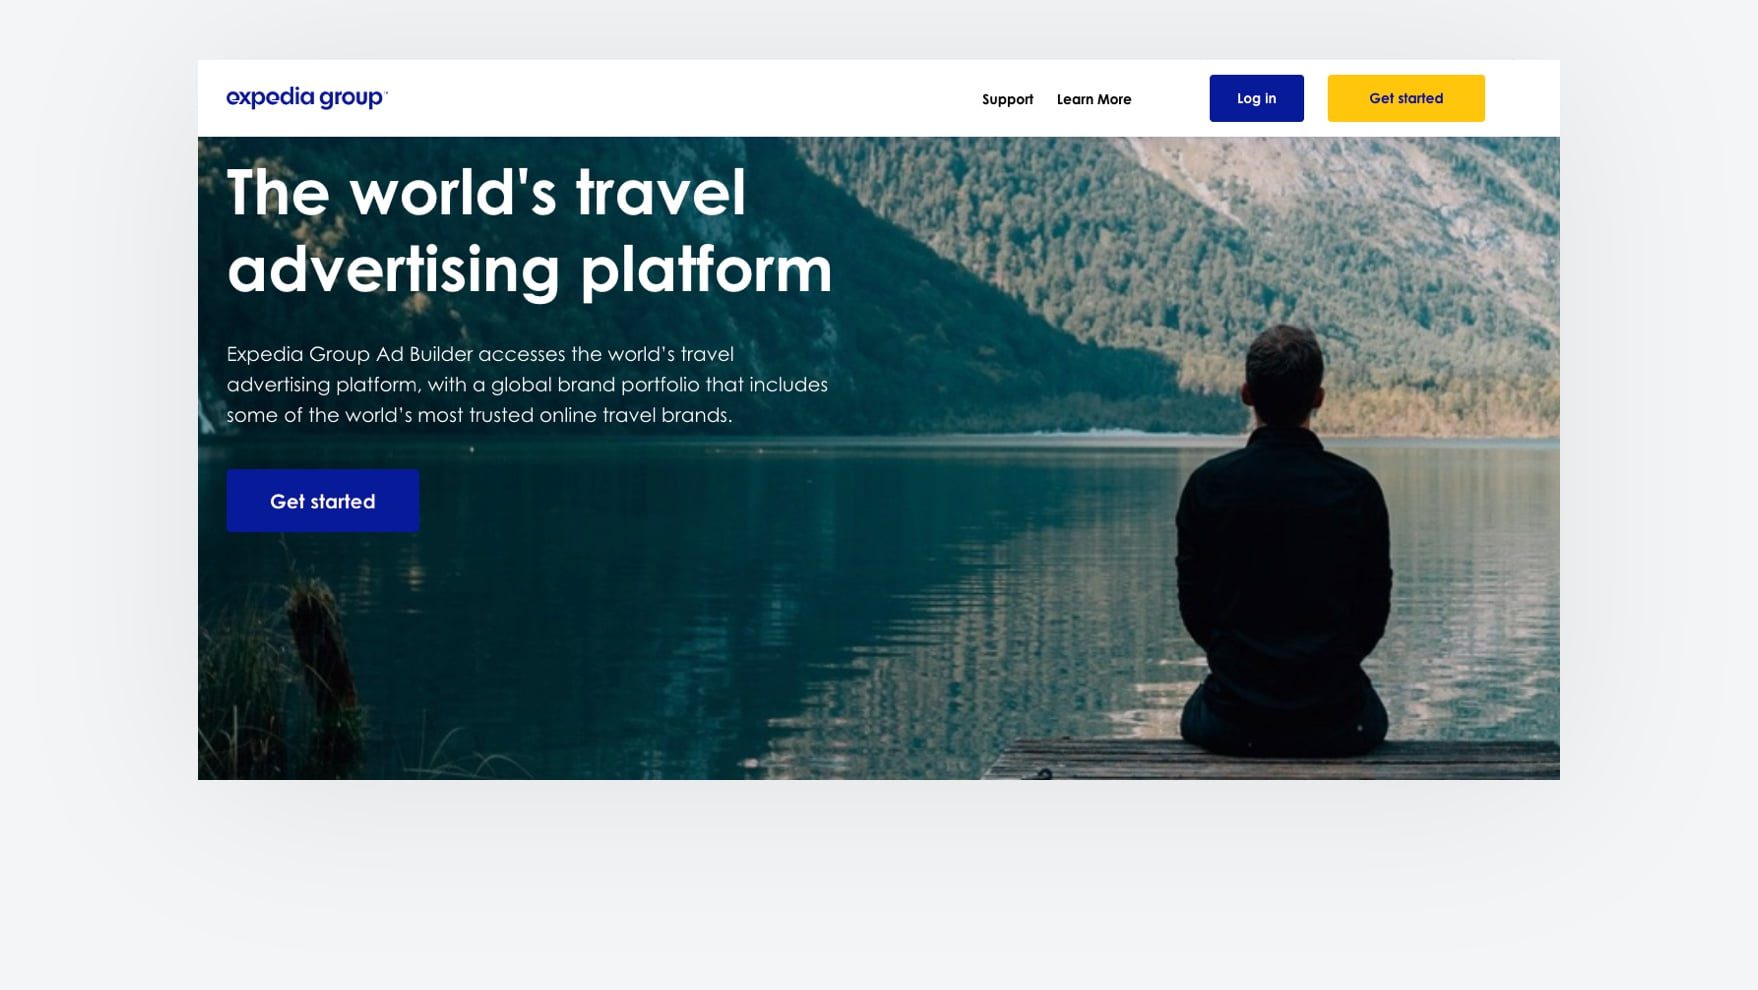 Expedia Group using DanAds ad solution